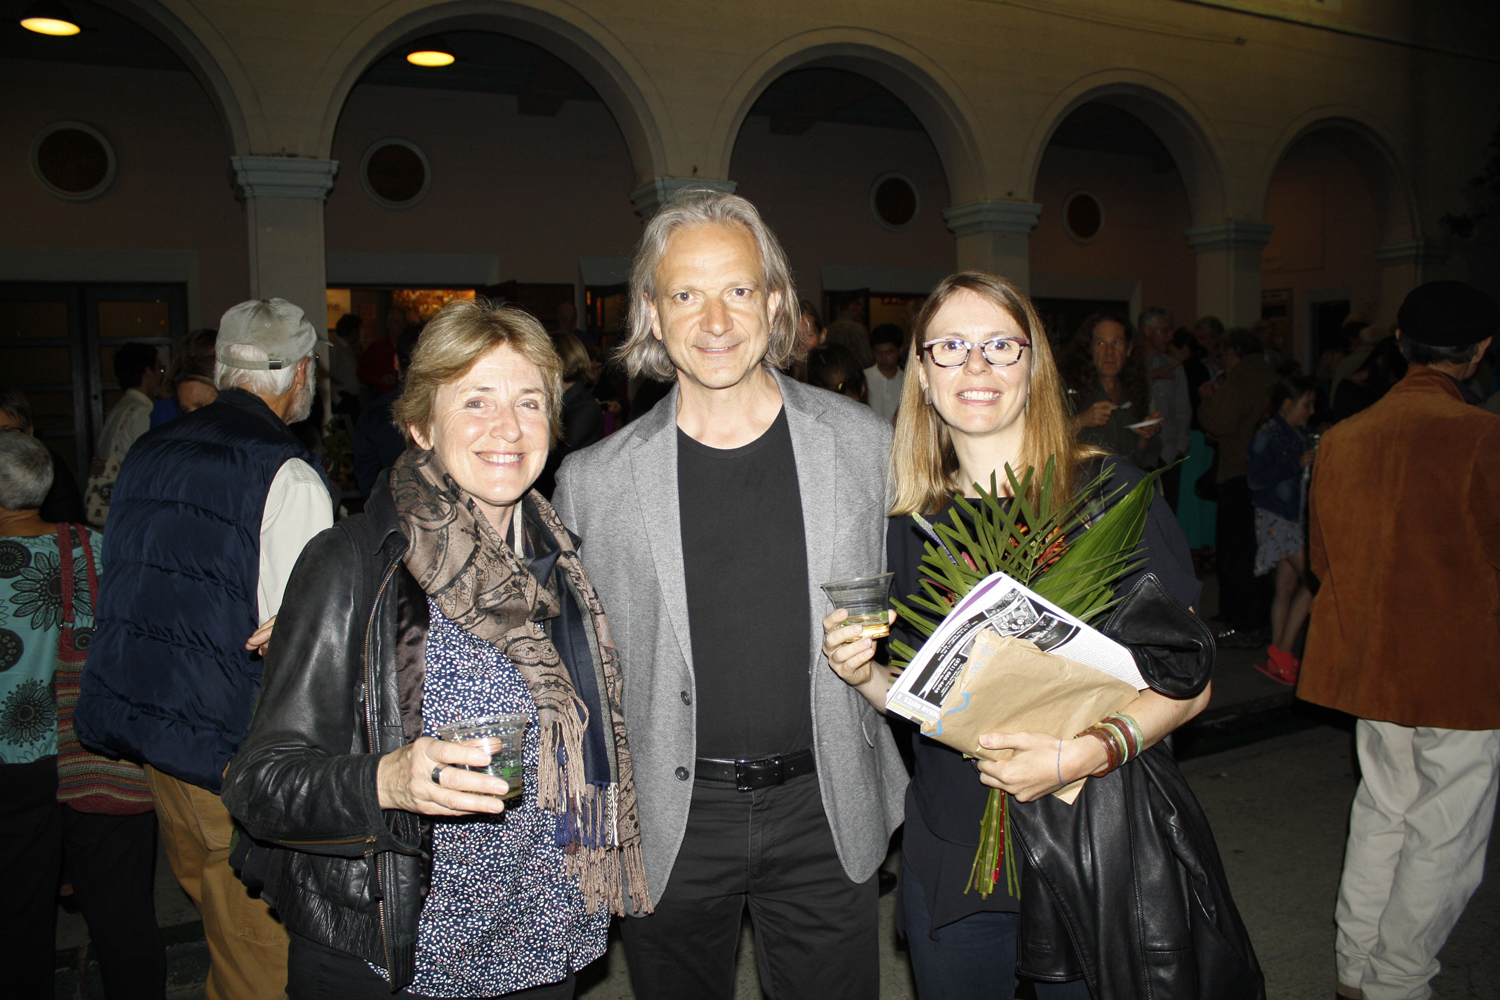 Lecturer Prue Ashurst with composers Michael Gandolfi and Anna Clyne at the post-concert reception outside the Santa Cruz Civic. (staff photo)